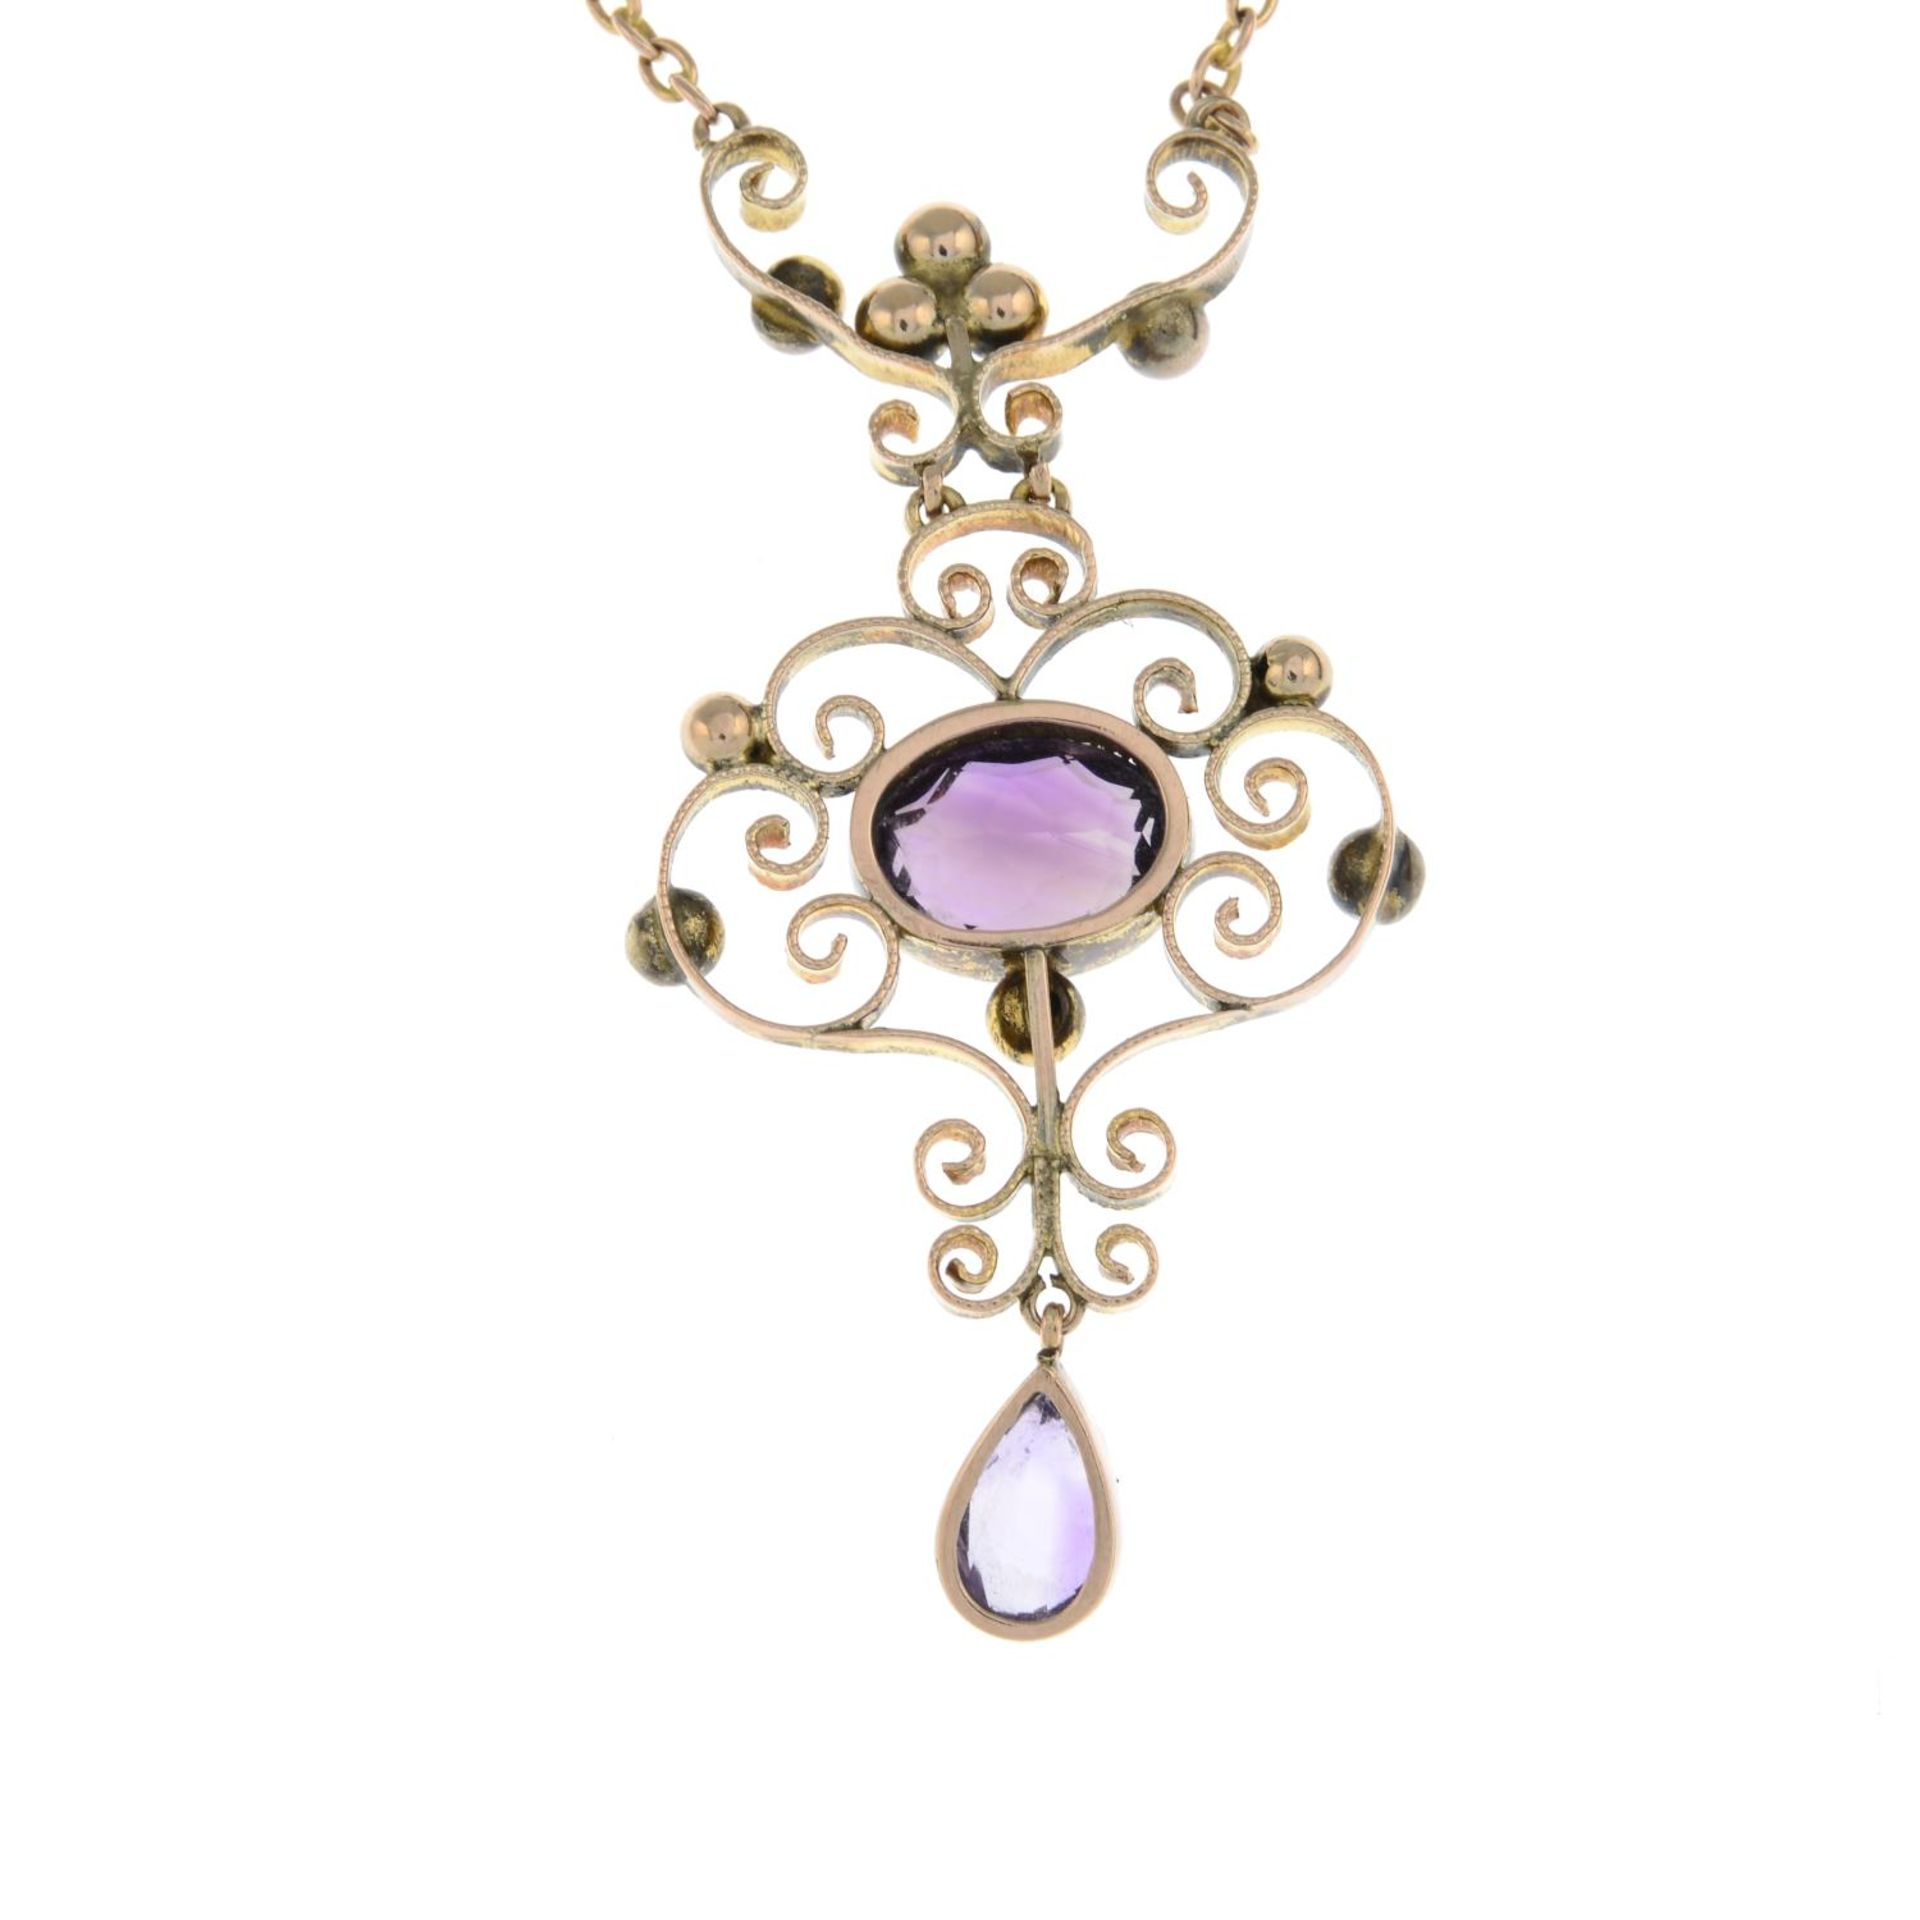 An early 20th century gold amethyst pendant, on an integral chain.Length of pendant drop 4.5cms. - Image 2 of 2